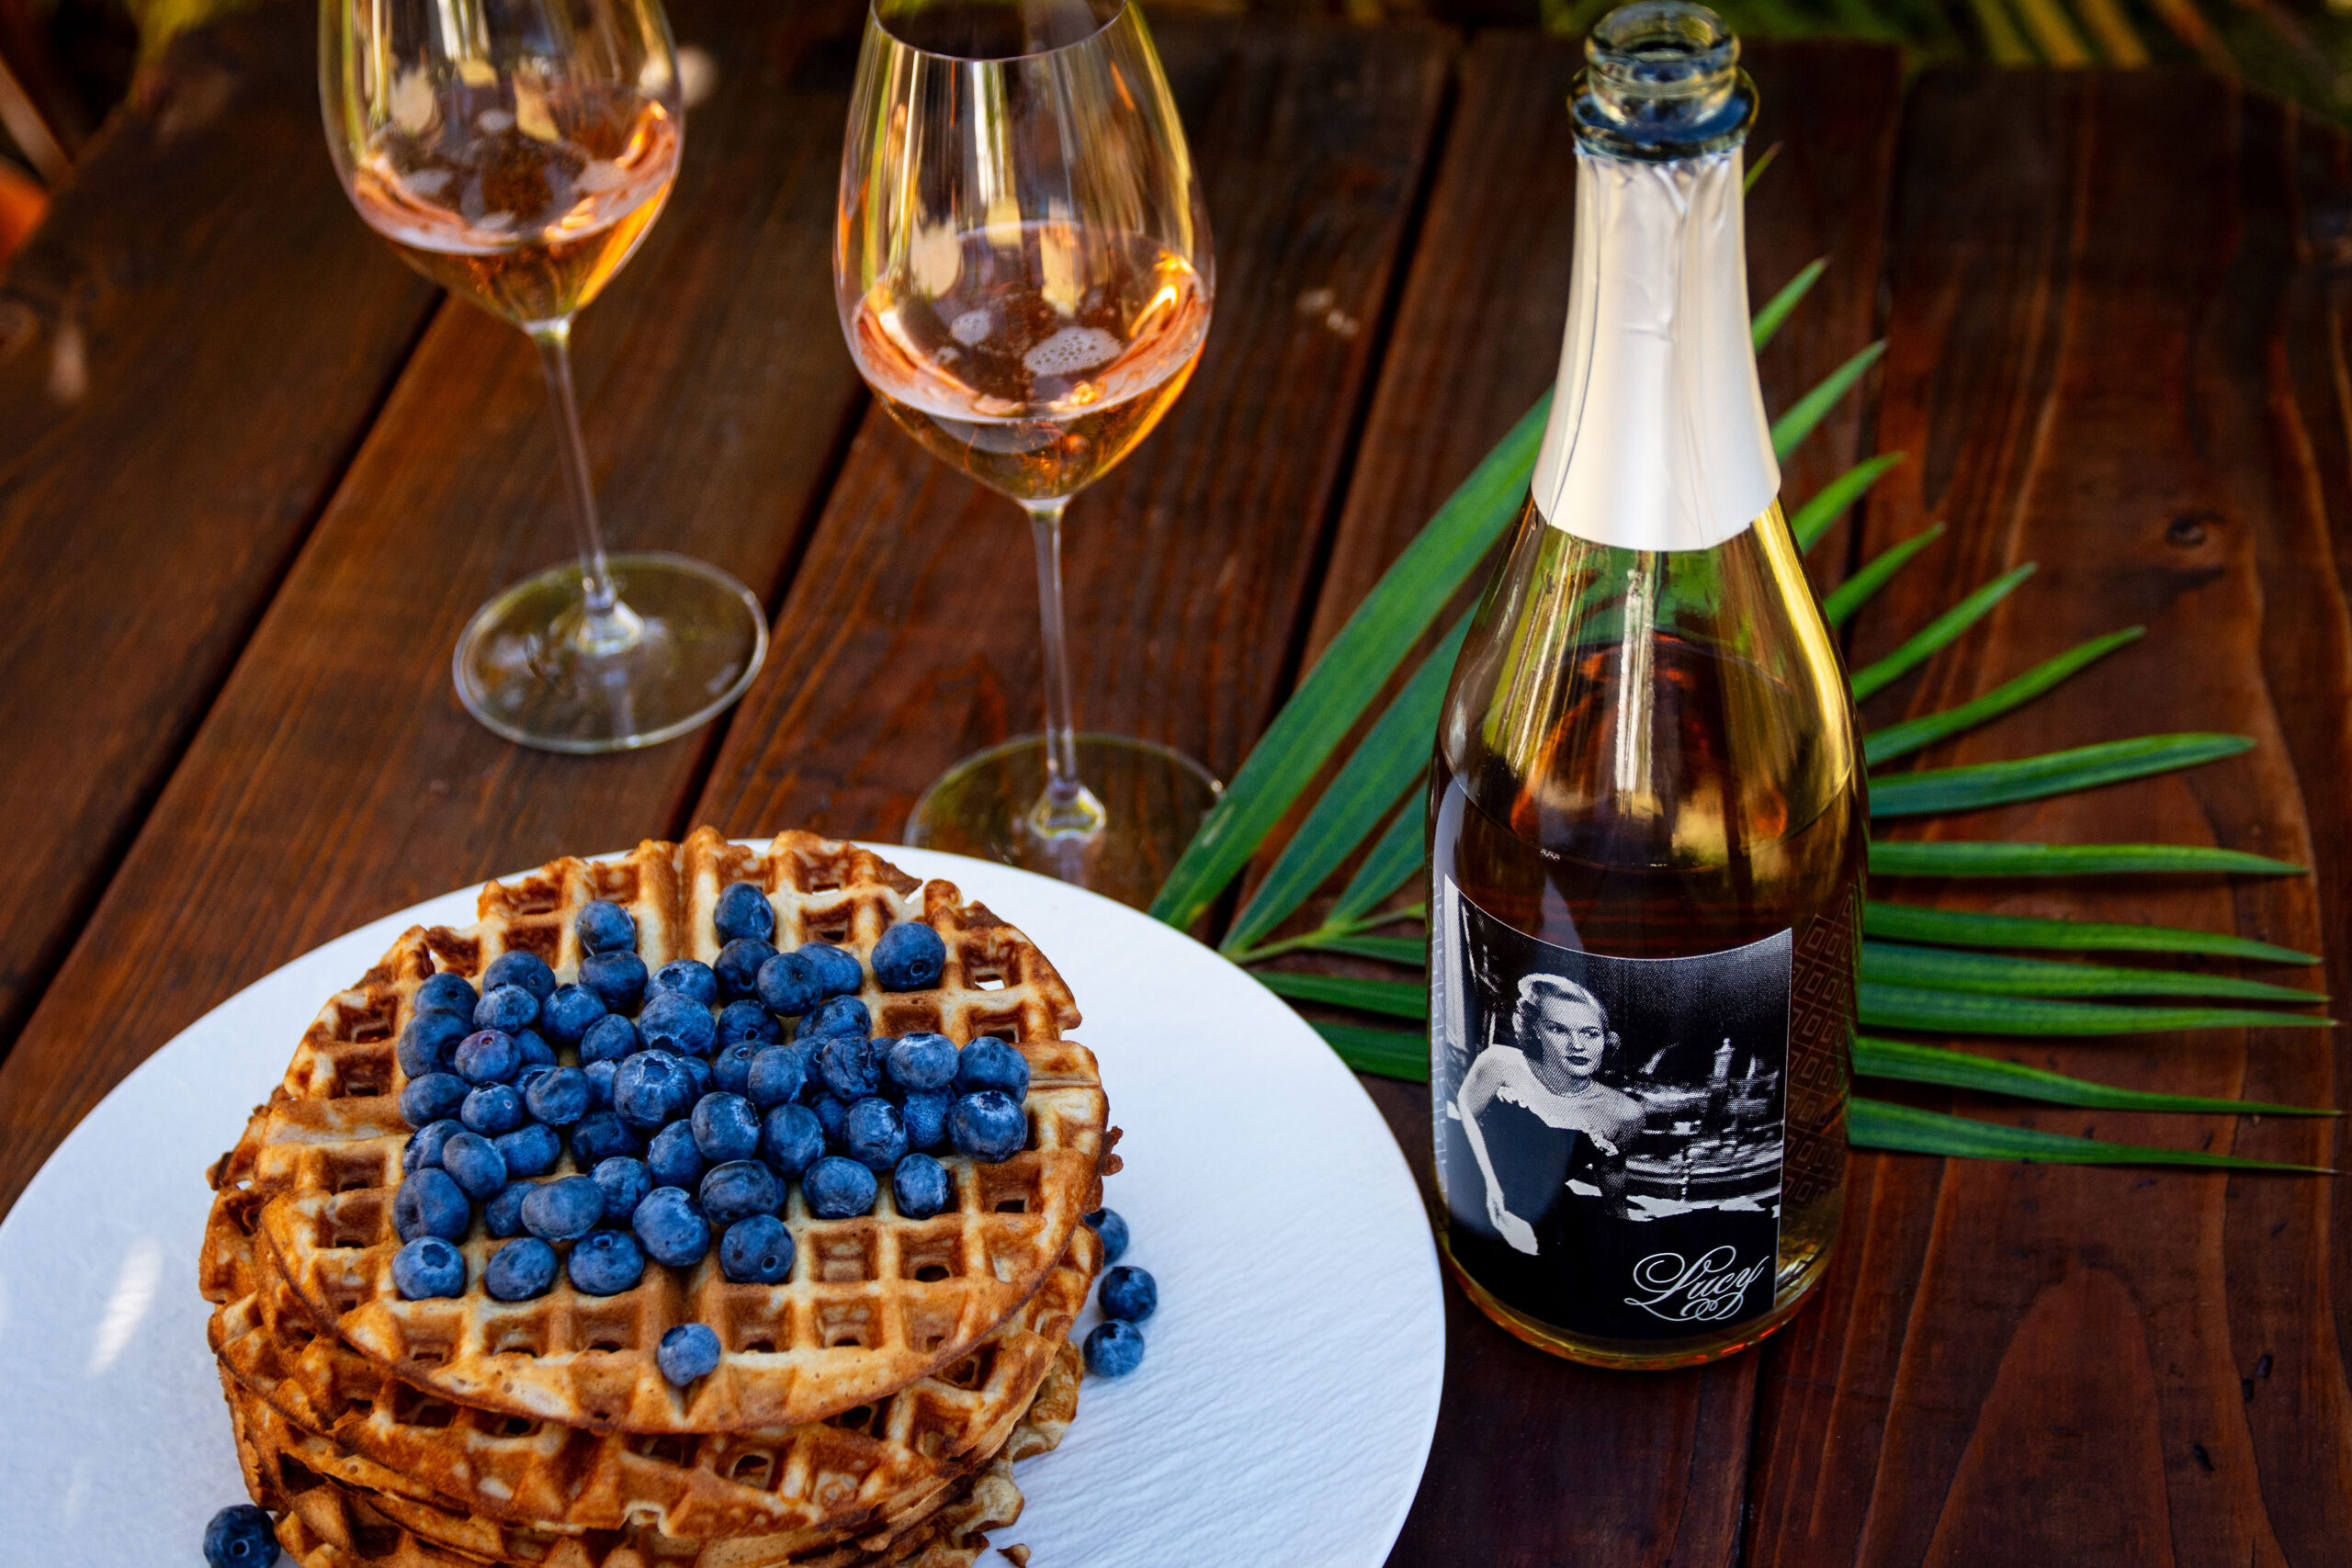 Waffles with blueberries and a bottle of Lucy